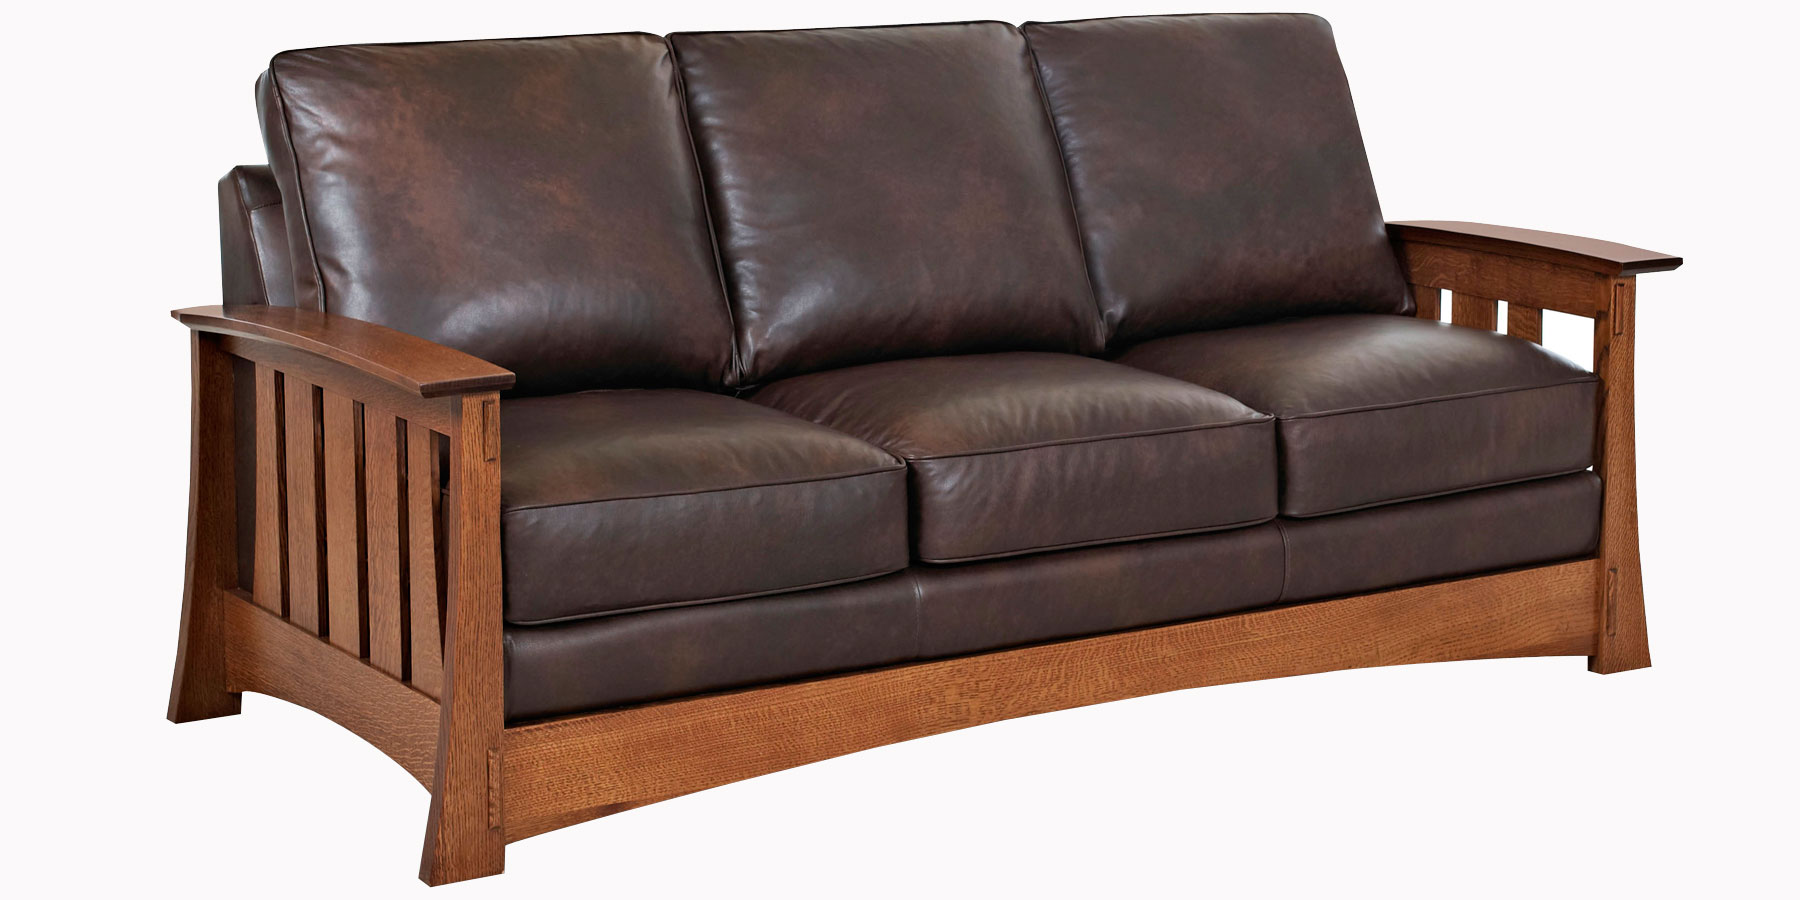 leather furniture stockton mission style group RLEWHYY